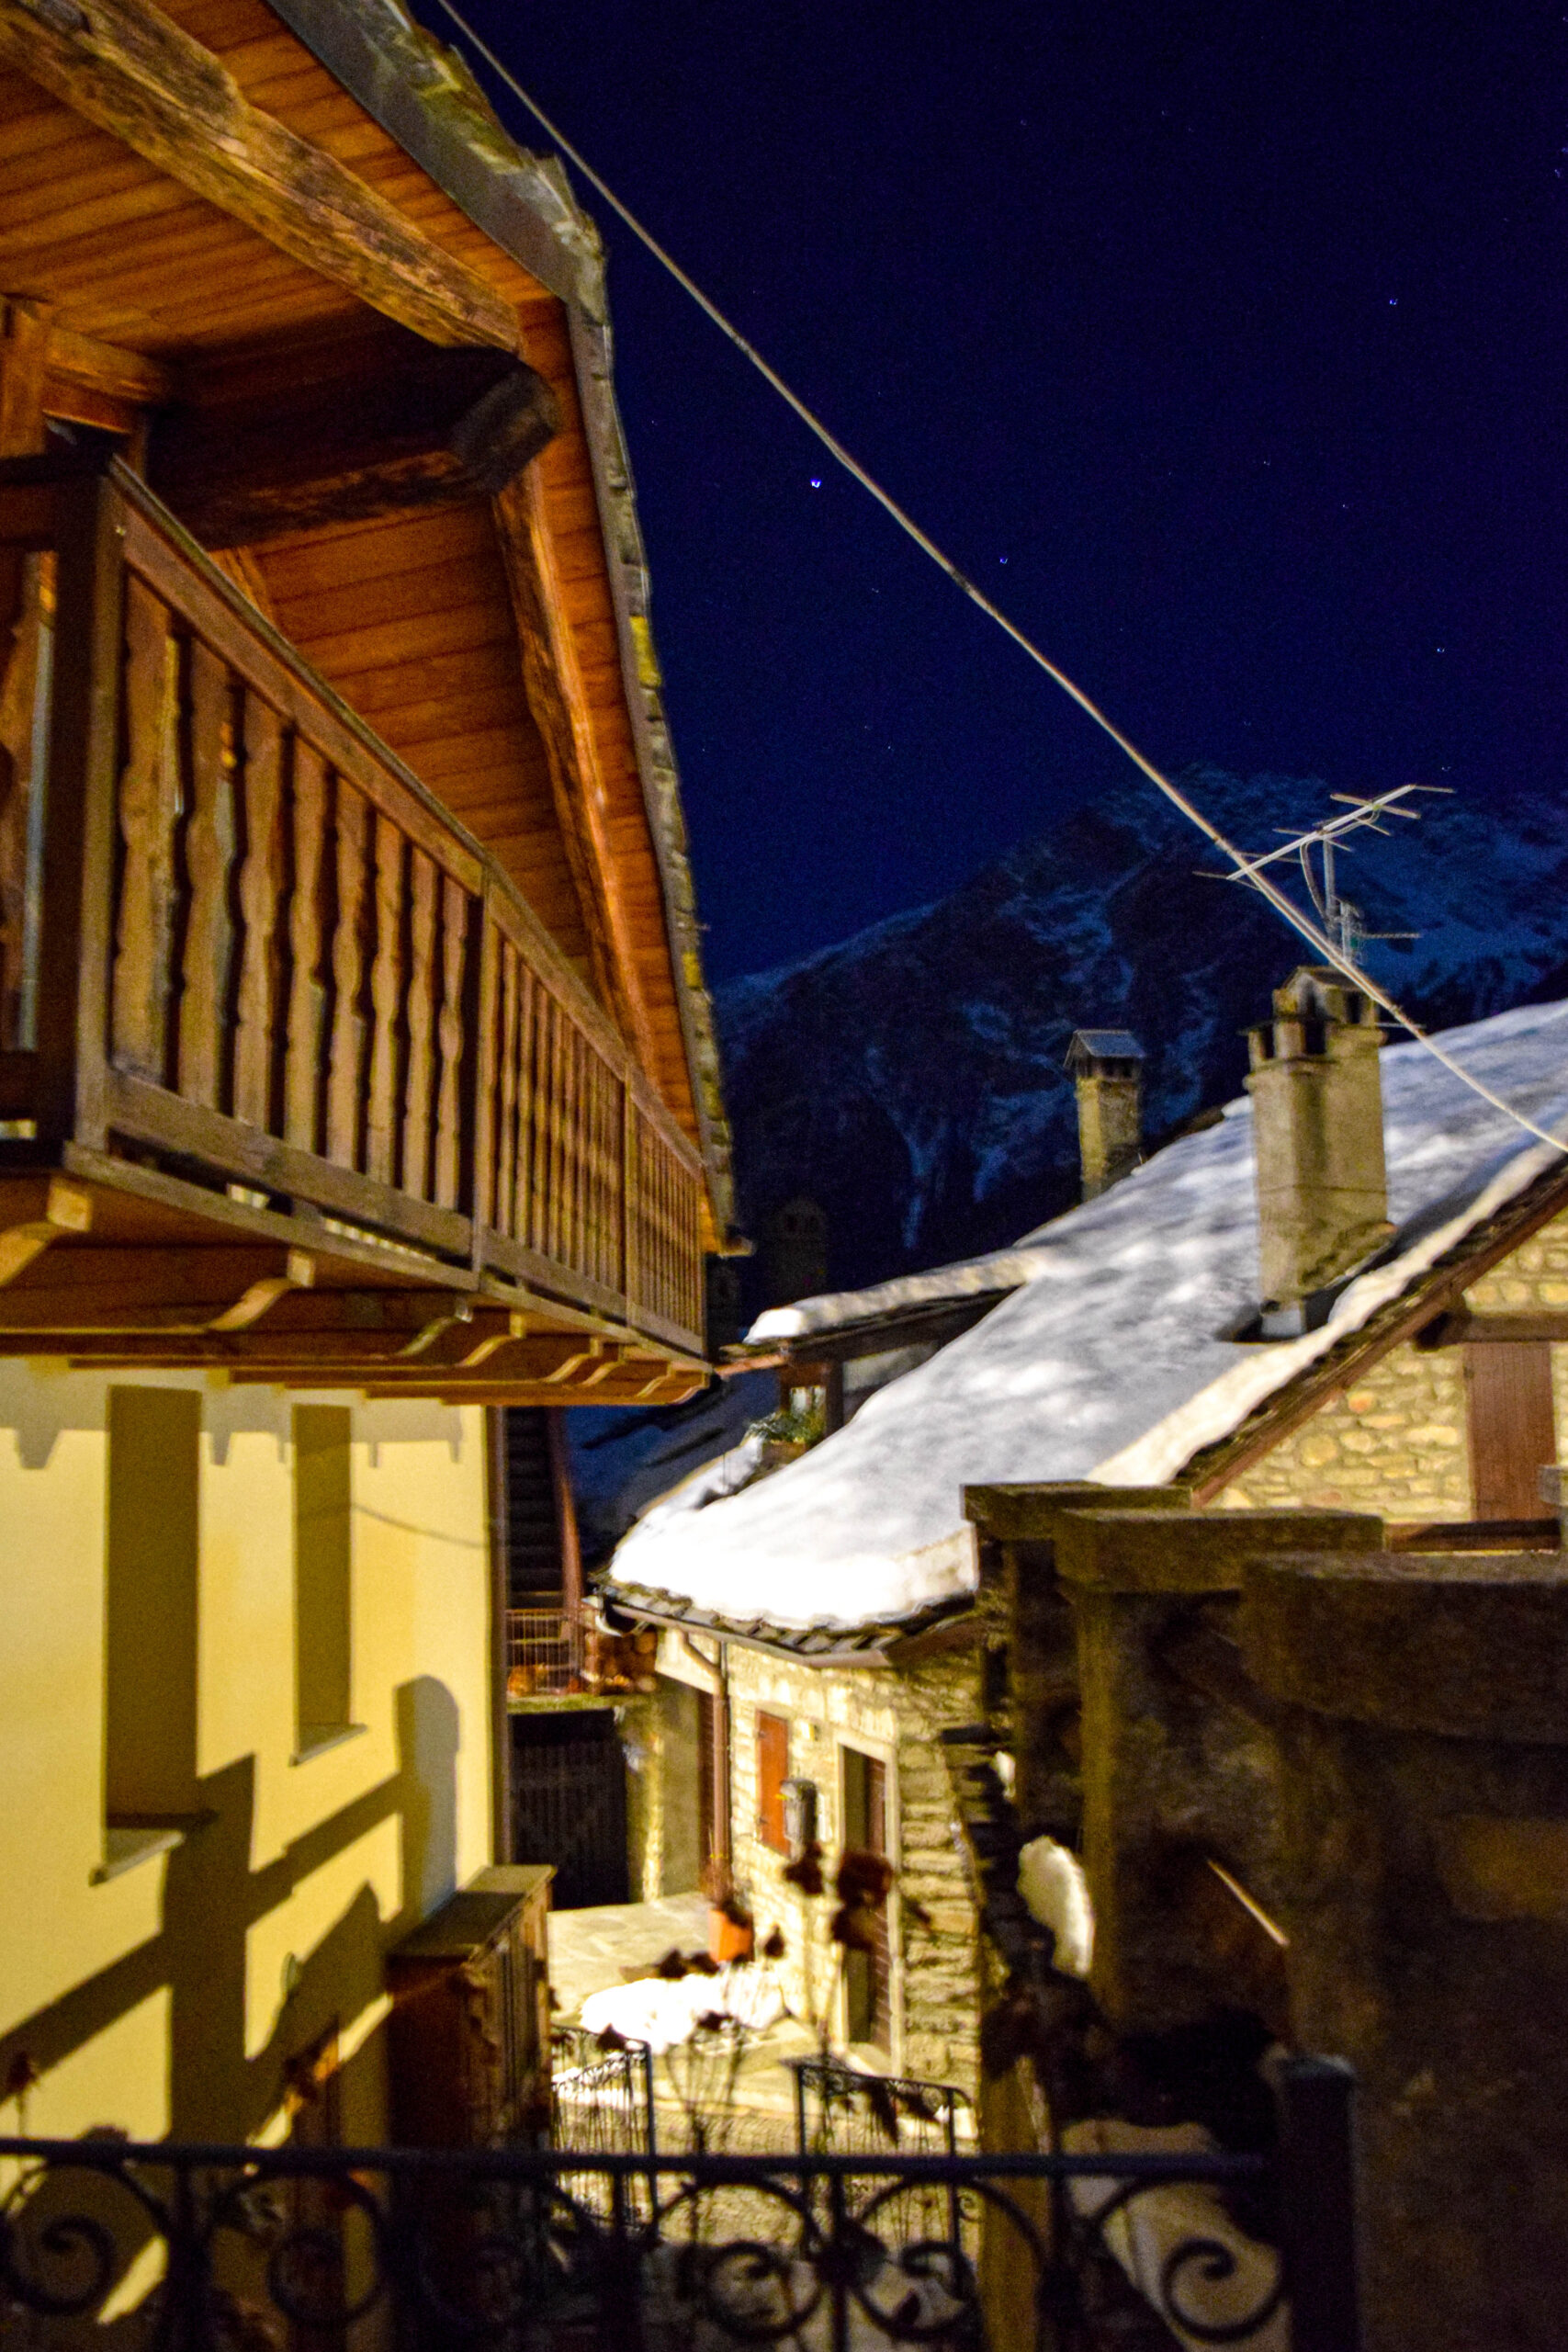 Courmayeur: A 3 Day Travel Guide to the Italian Ski Resort